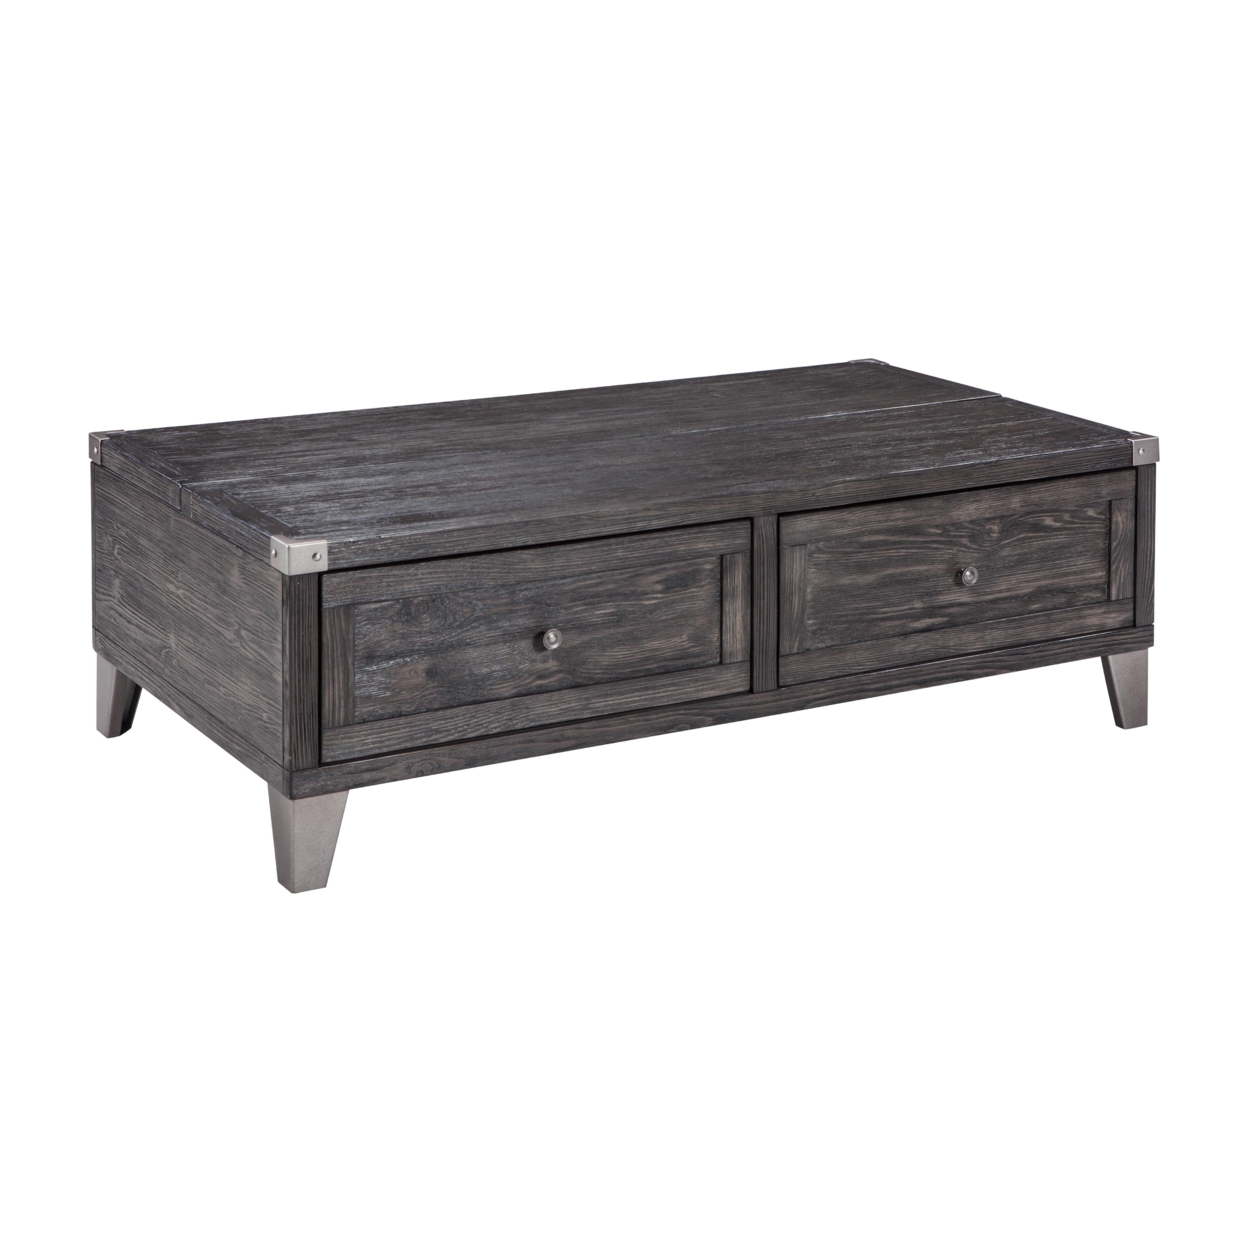 Wooden Lift Top Cocktail Table With 2 Drawers And Metal Accents, Gray- Saltoro Sherpi